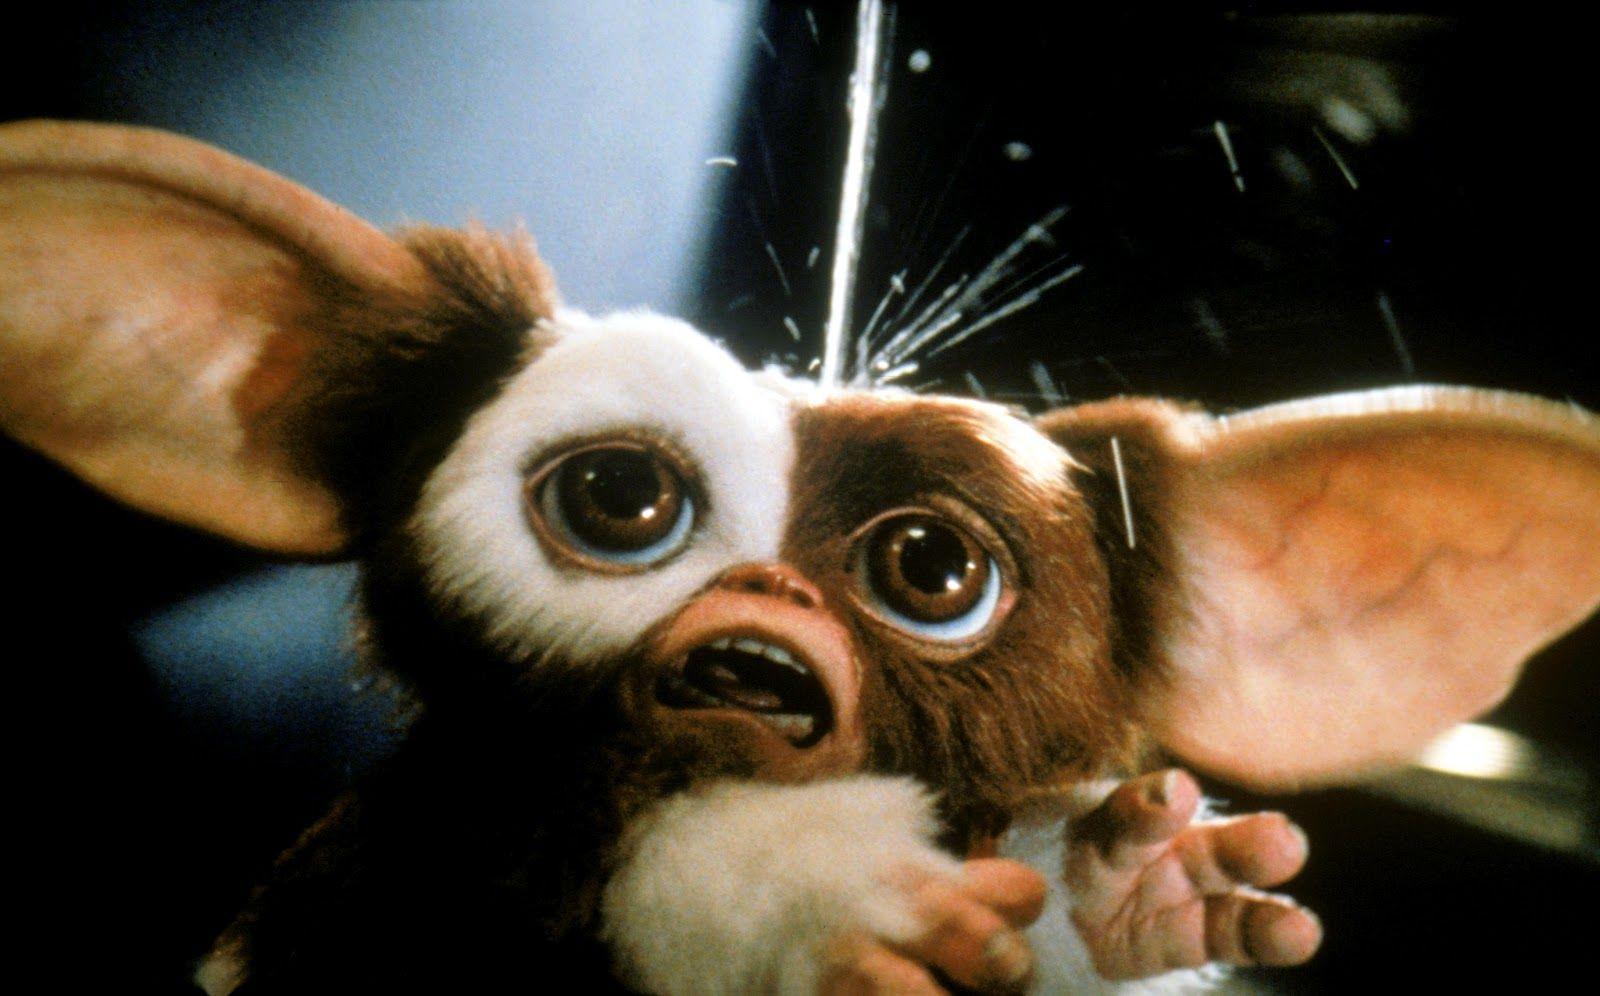 43464 Gremlins 2 The New Batch HD Gizmo Gremlins  Rare Gallery HD  Wallpapers